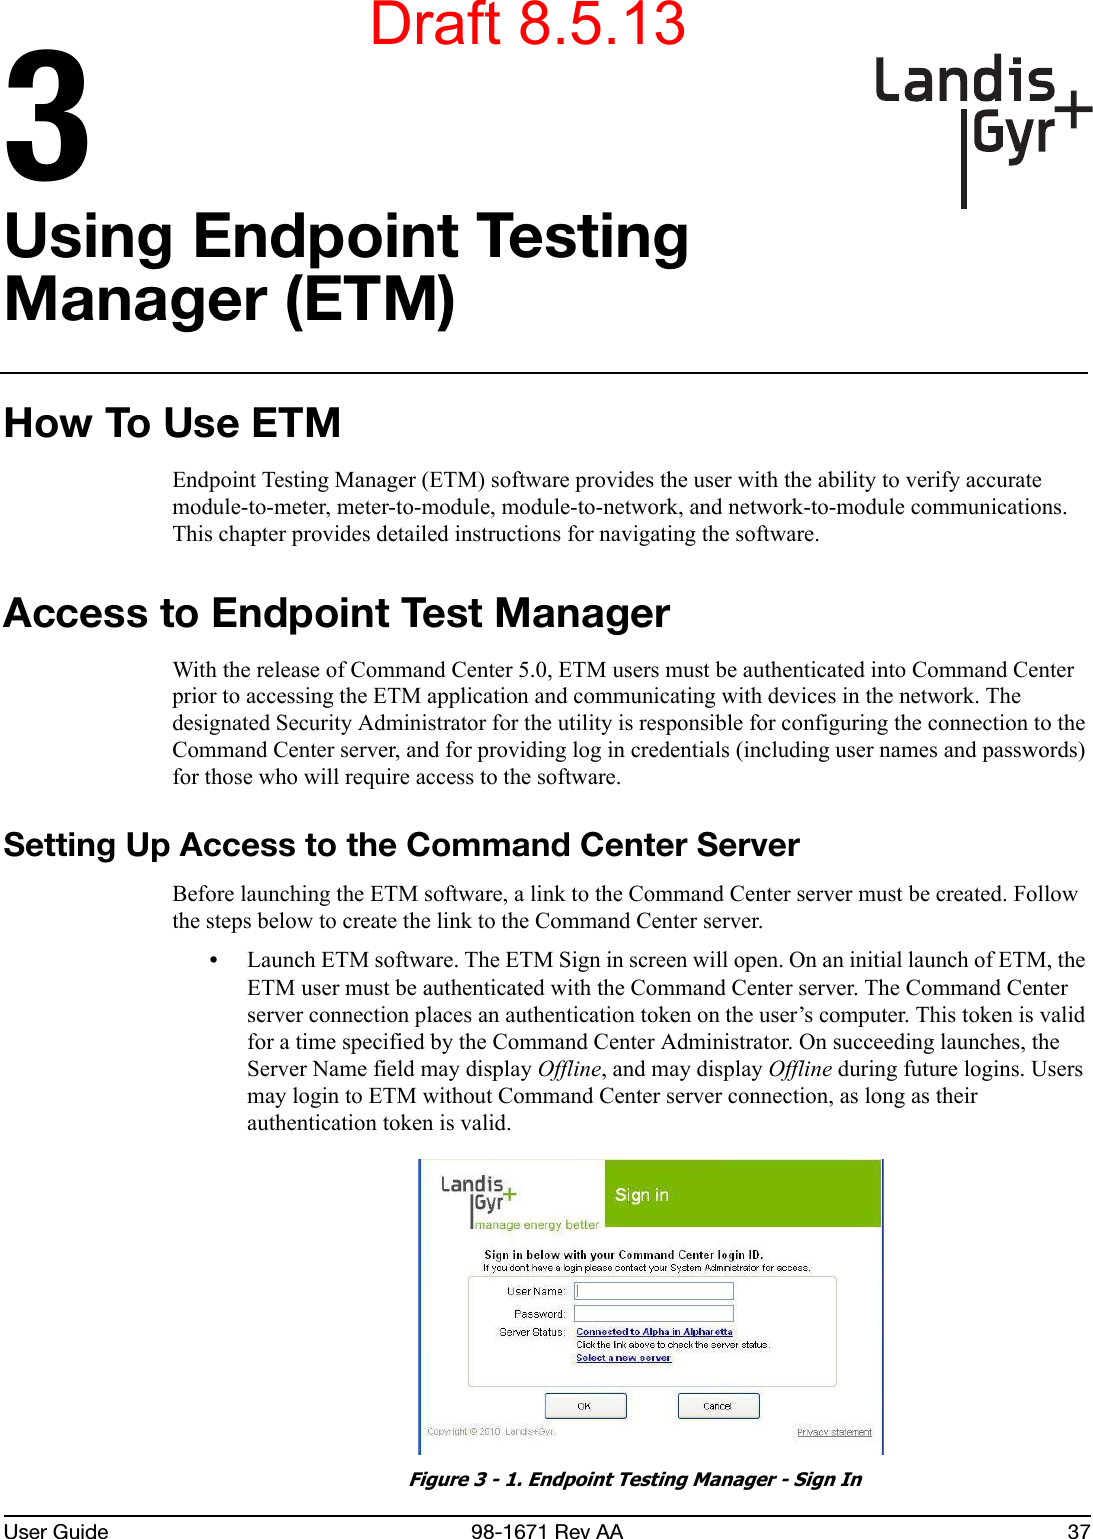 User Guide 98-1671 Rev AA 373Using Endpoint Testing Manager (ETM)How To Use ETMEndpoint Testing Manager (ETM) software provides the user with the ability to verify accurate module-to-meter, meter-to-module, module-to-network, and network-to-module communications. This chapter provides detailed instructions for navigating the software.Access to Endpoint Test ManagerWith the release of Command Center 5.0, ETM users must be authenticated into Command Center prior to accessing the ETM application and communicating with devices in the network. The designated Security Administrator for the utility is responsible for configuring the connection to the Command Center server, and for providing log in credentials (including user names and passwords) for those who will require access to the software.Setting Up Access to the Command Center ServerBefore launching the ETM software, a link to the Command Center server must be created. Follow the steps below to create the link to the Command Center server.•Launch ETM software. The ETM Sign in screen will open. On an initial launch of ETM, the ETM user must be authenticated with the Command Center server. The Command Center server connection places an authentication token on the user’s computer. This token is valid for a time specified by the Command Center Administrator. On succeeding launches, the Server Name field may display Offline, and may display Offline during future logins. Users may login to ETM without Command Center server connection, as long as their authentication token is valid. Figure 3 - 1. Endpoint Testing Manager - Sign InDraft 8.5.13